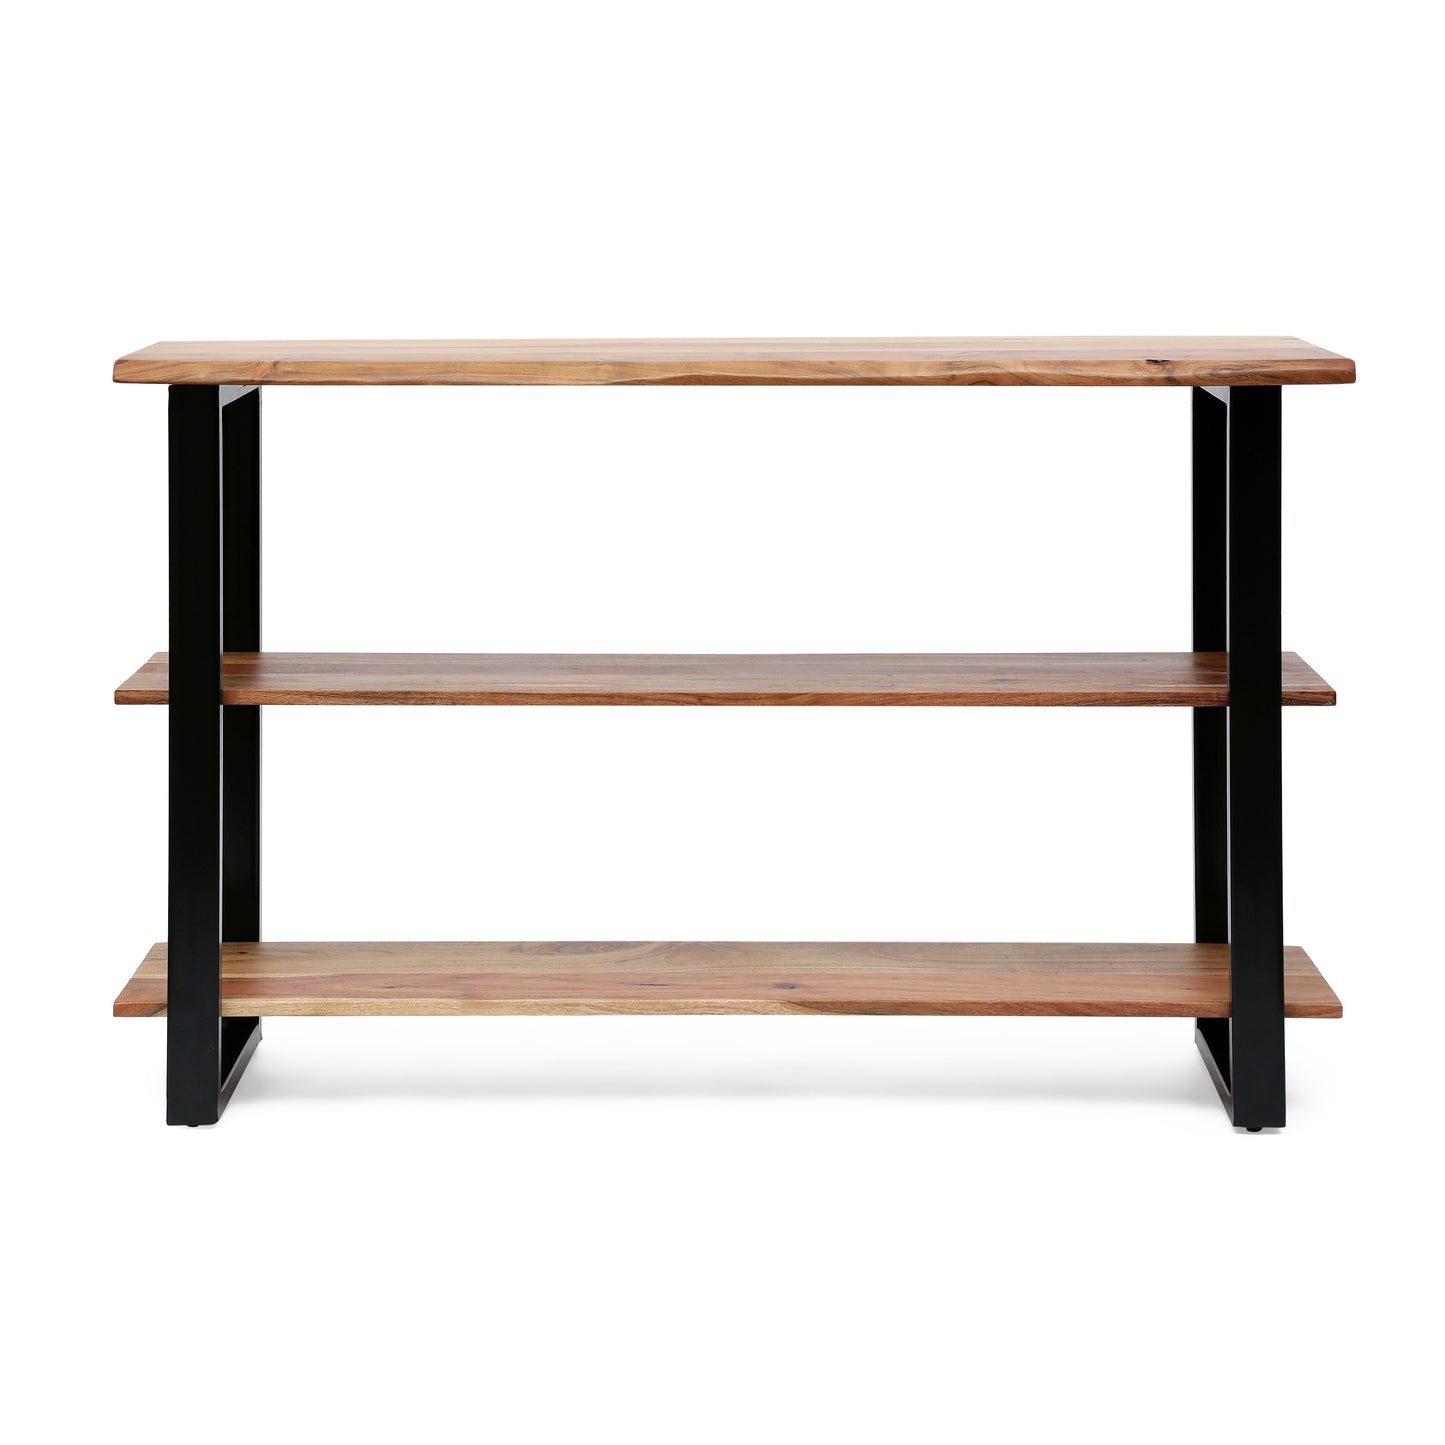 Canaan Handcrafted Modern Industrial Acacia Wood Media Console Table